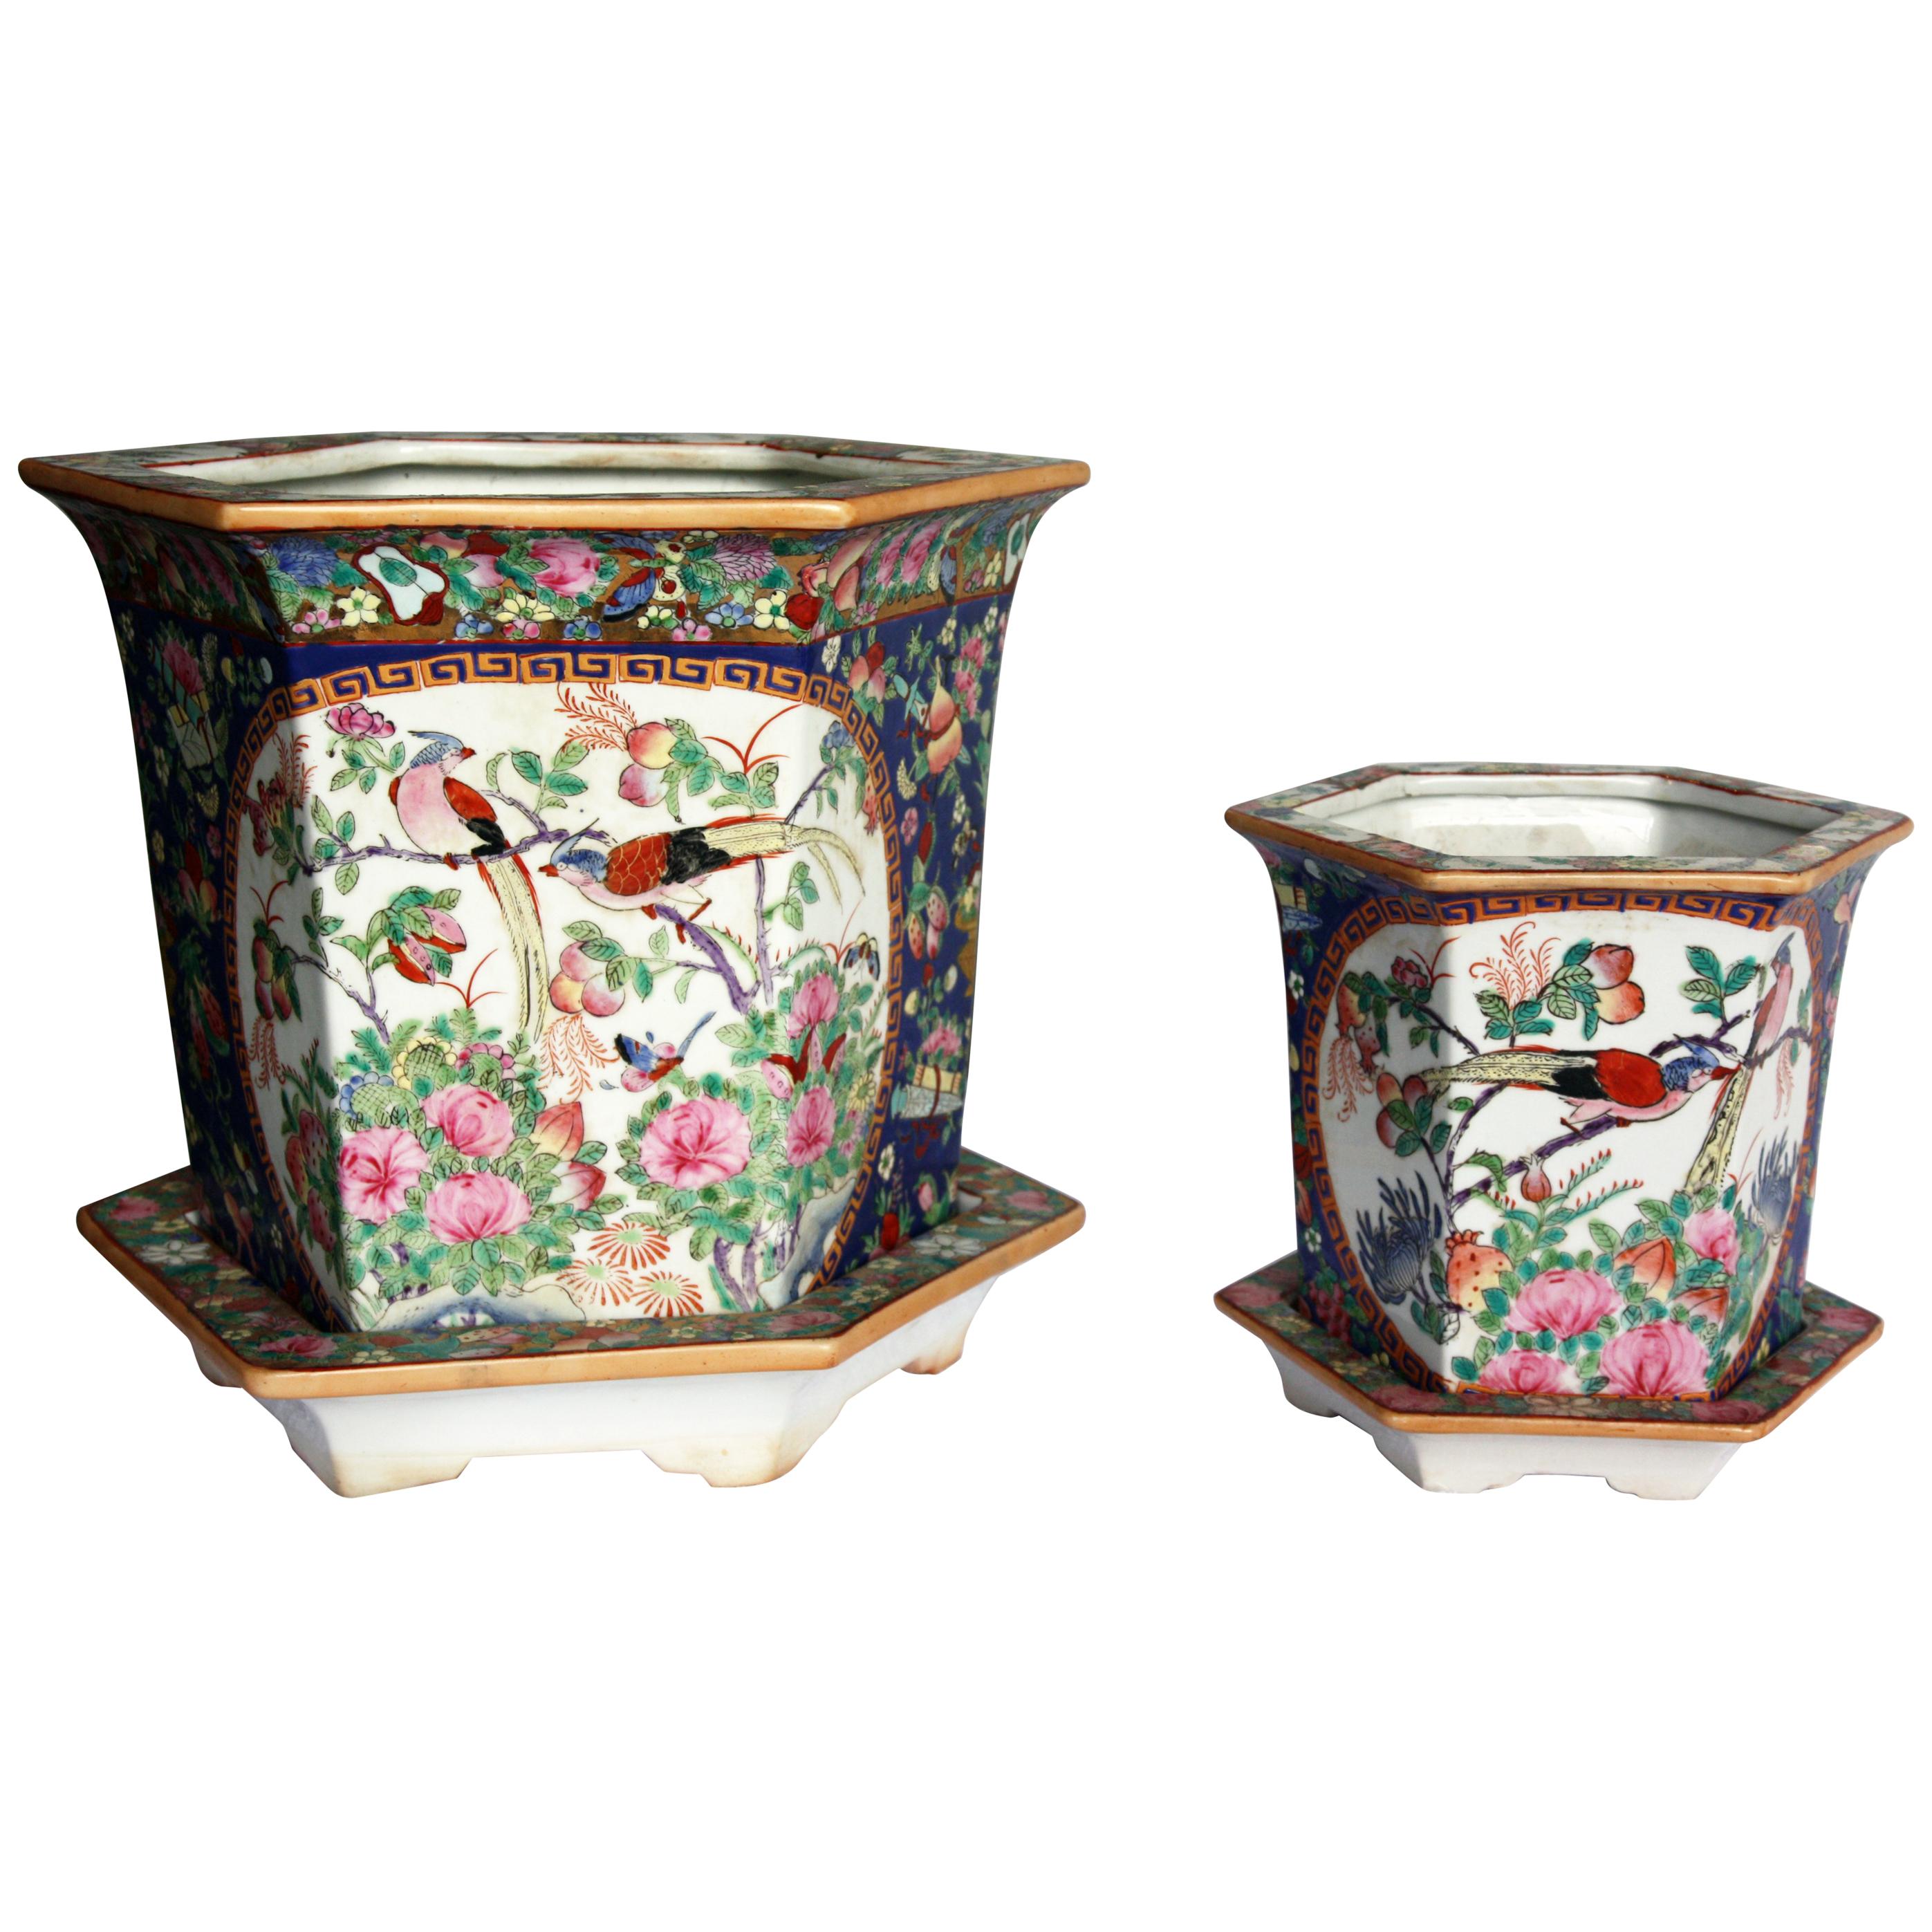 Pair of Signed, Hand-Painted Jardinieres, Large and Small with Plates